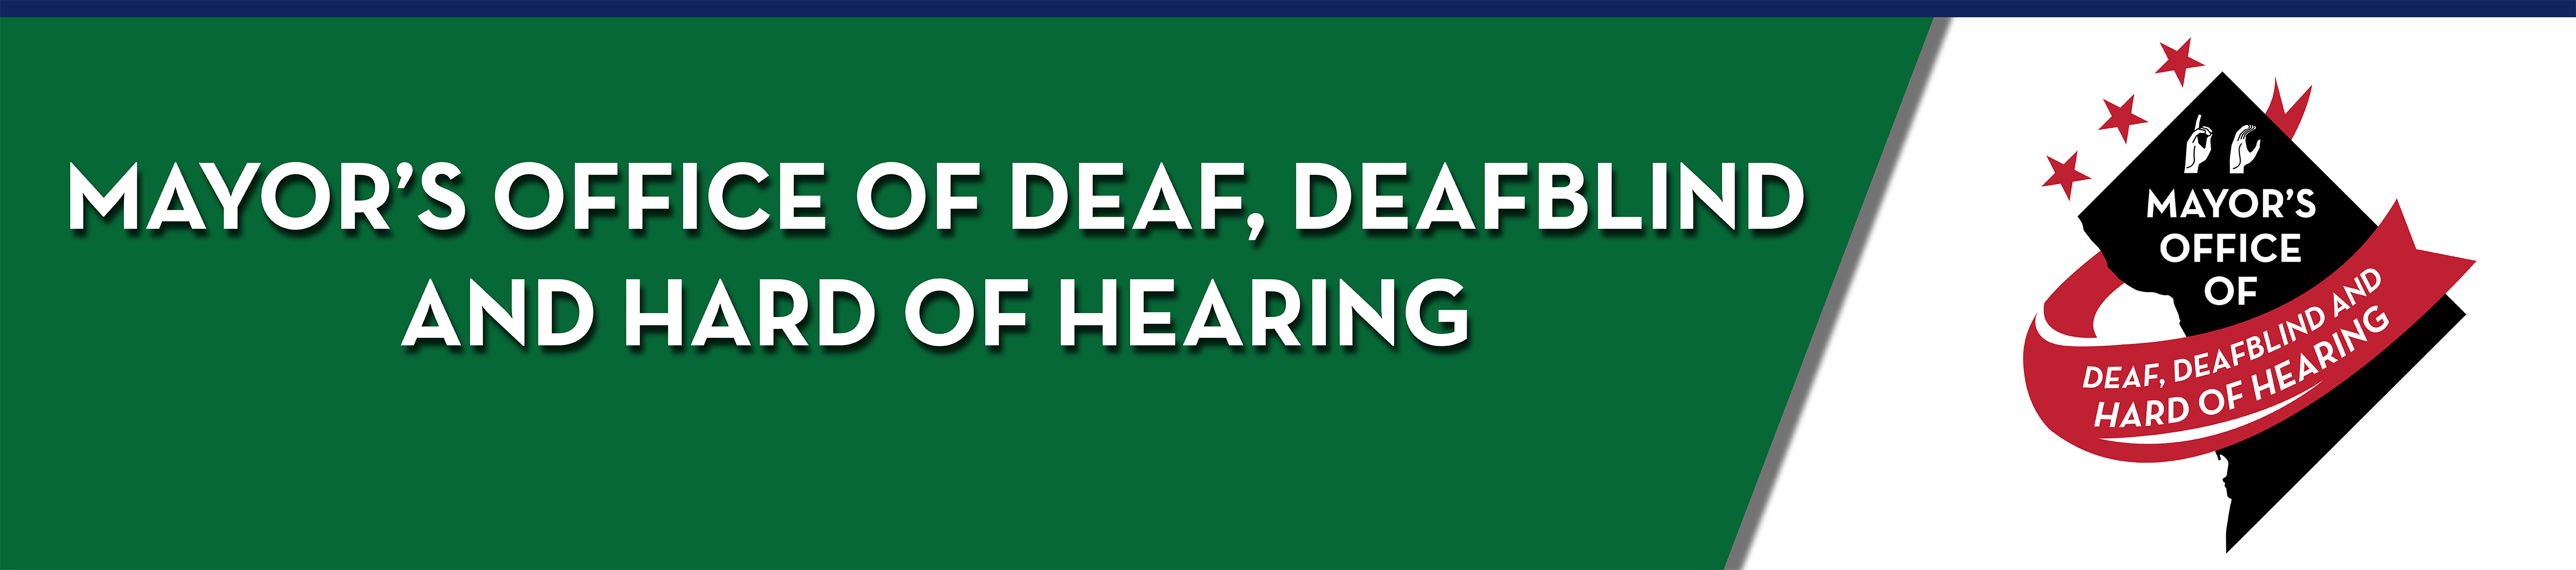 Mayor's Office of Deaf, DeafBlind and Hard of Hearing